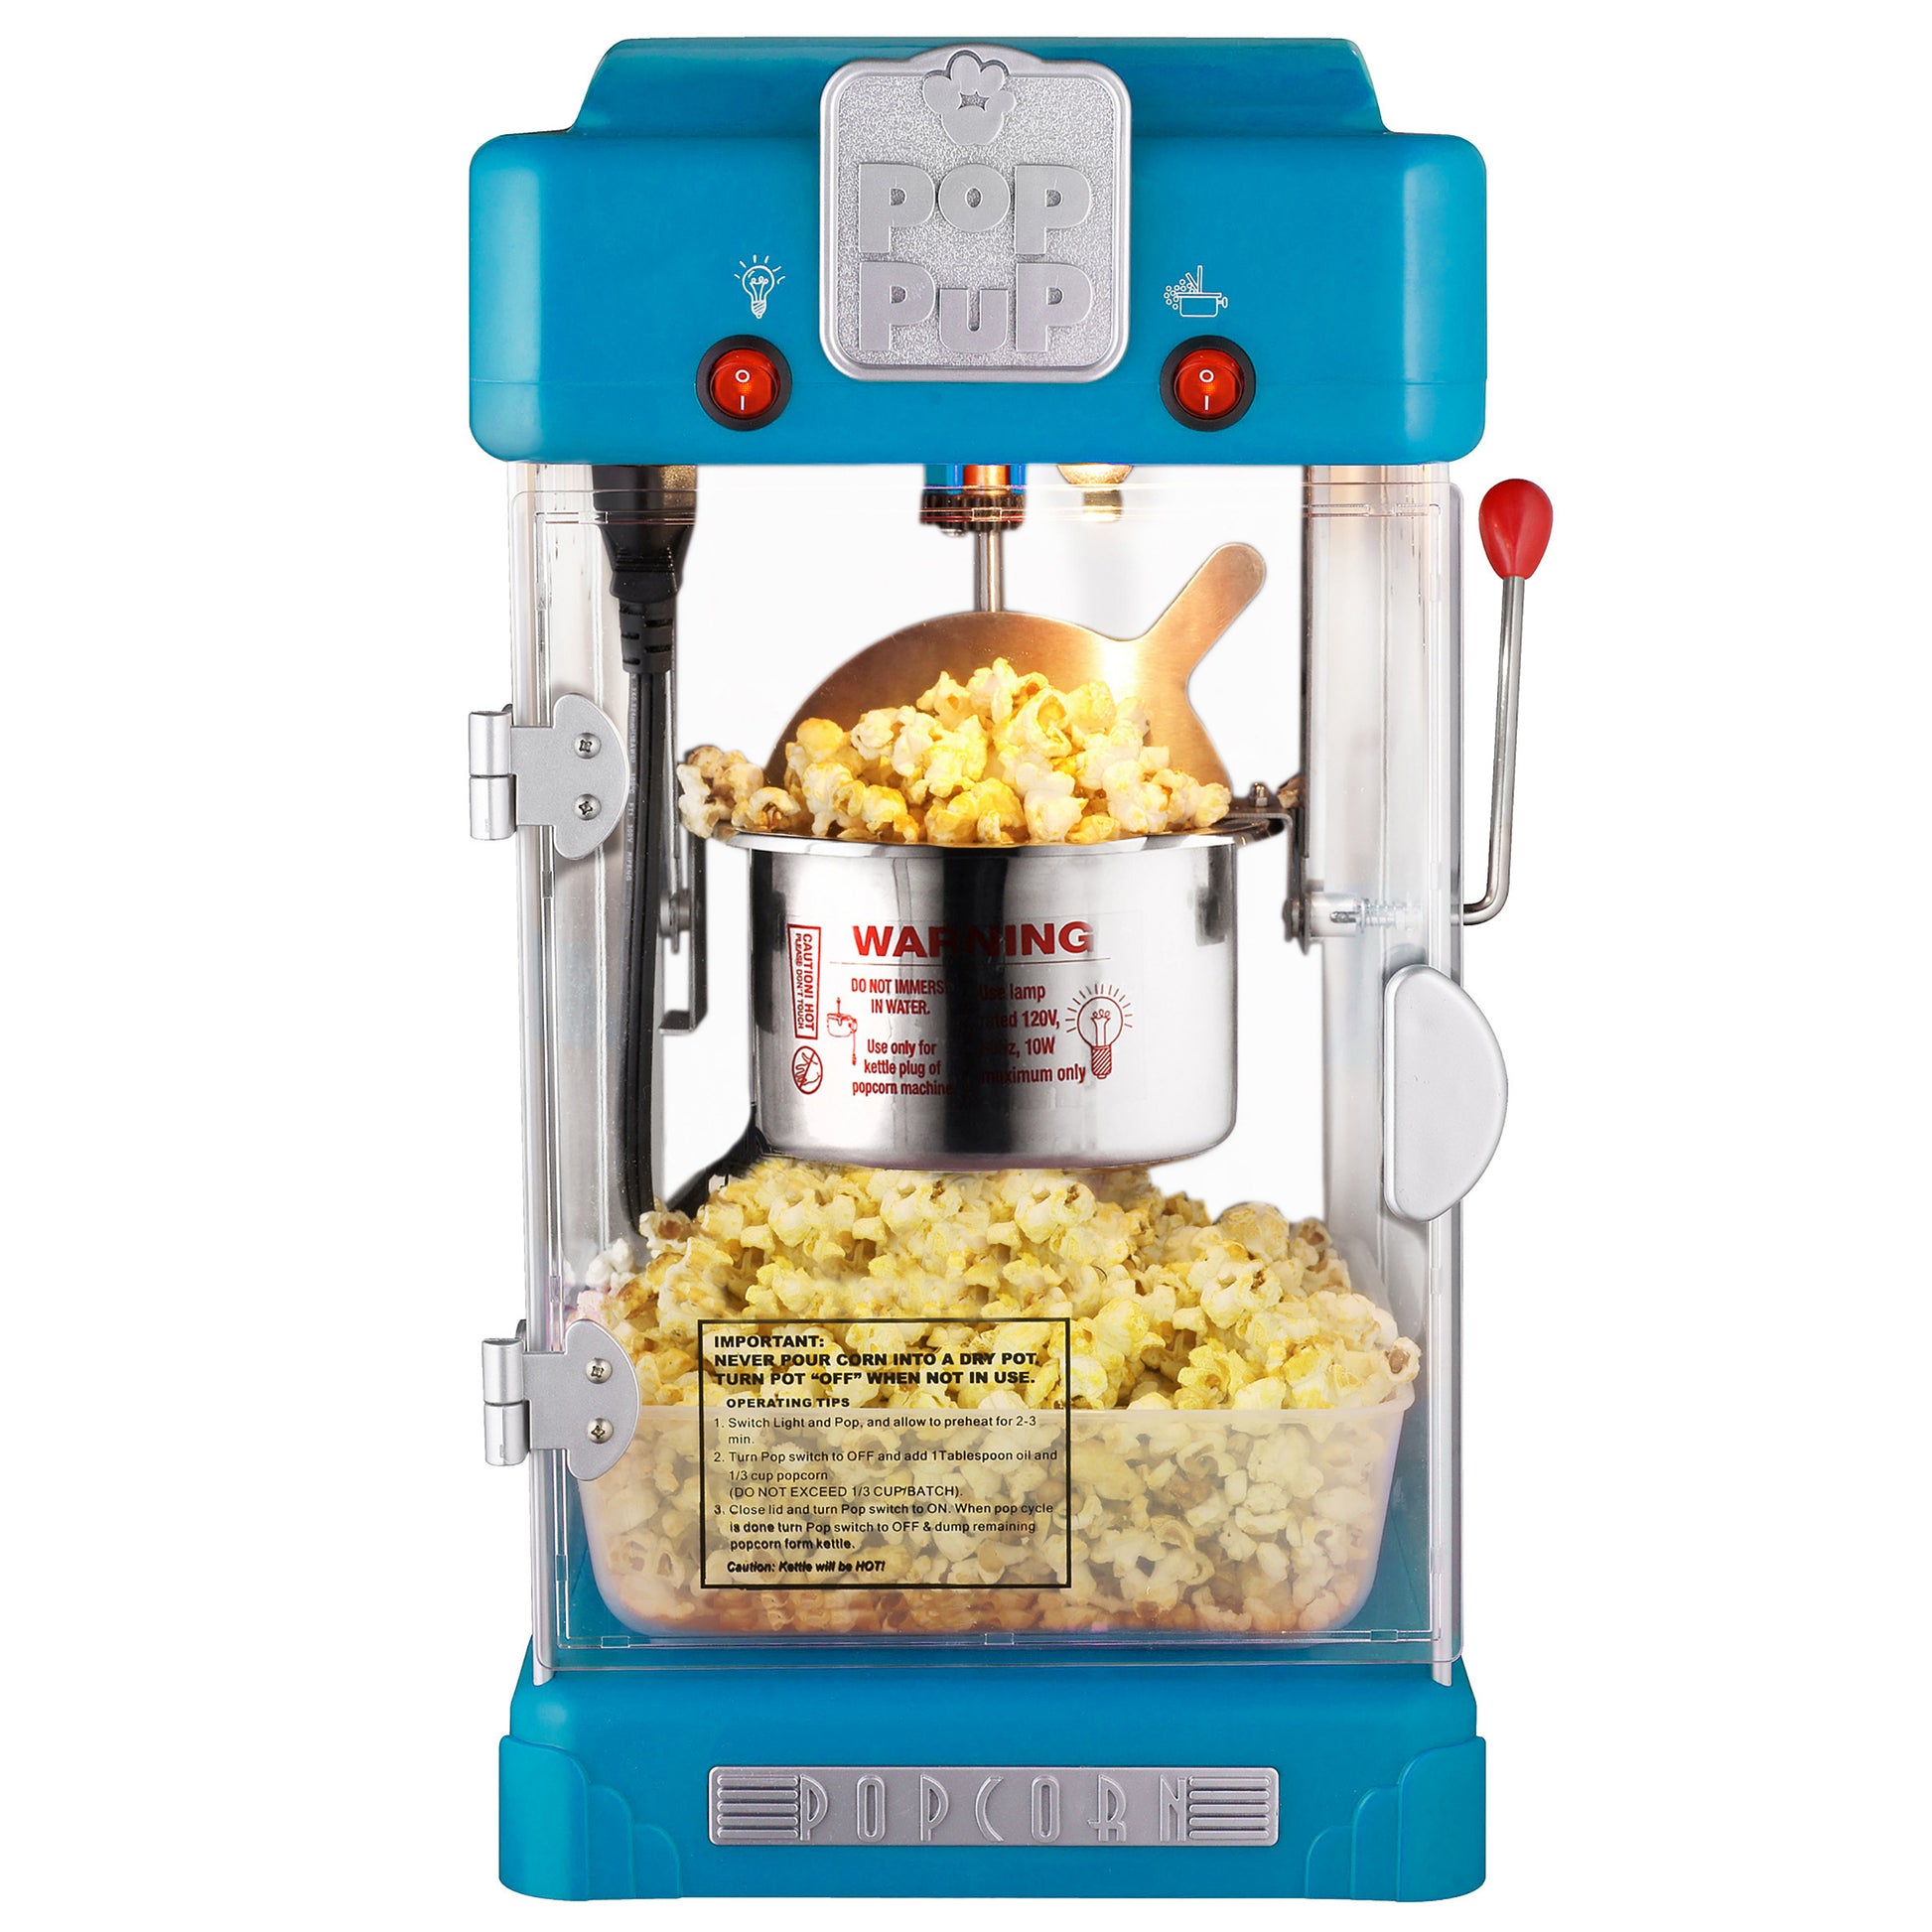 Pop Pup Countertop Popcorn Machine 2.5oz Kettle with Measuring Scoop, and 25 Serving by Great Northern (Blue)